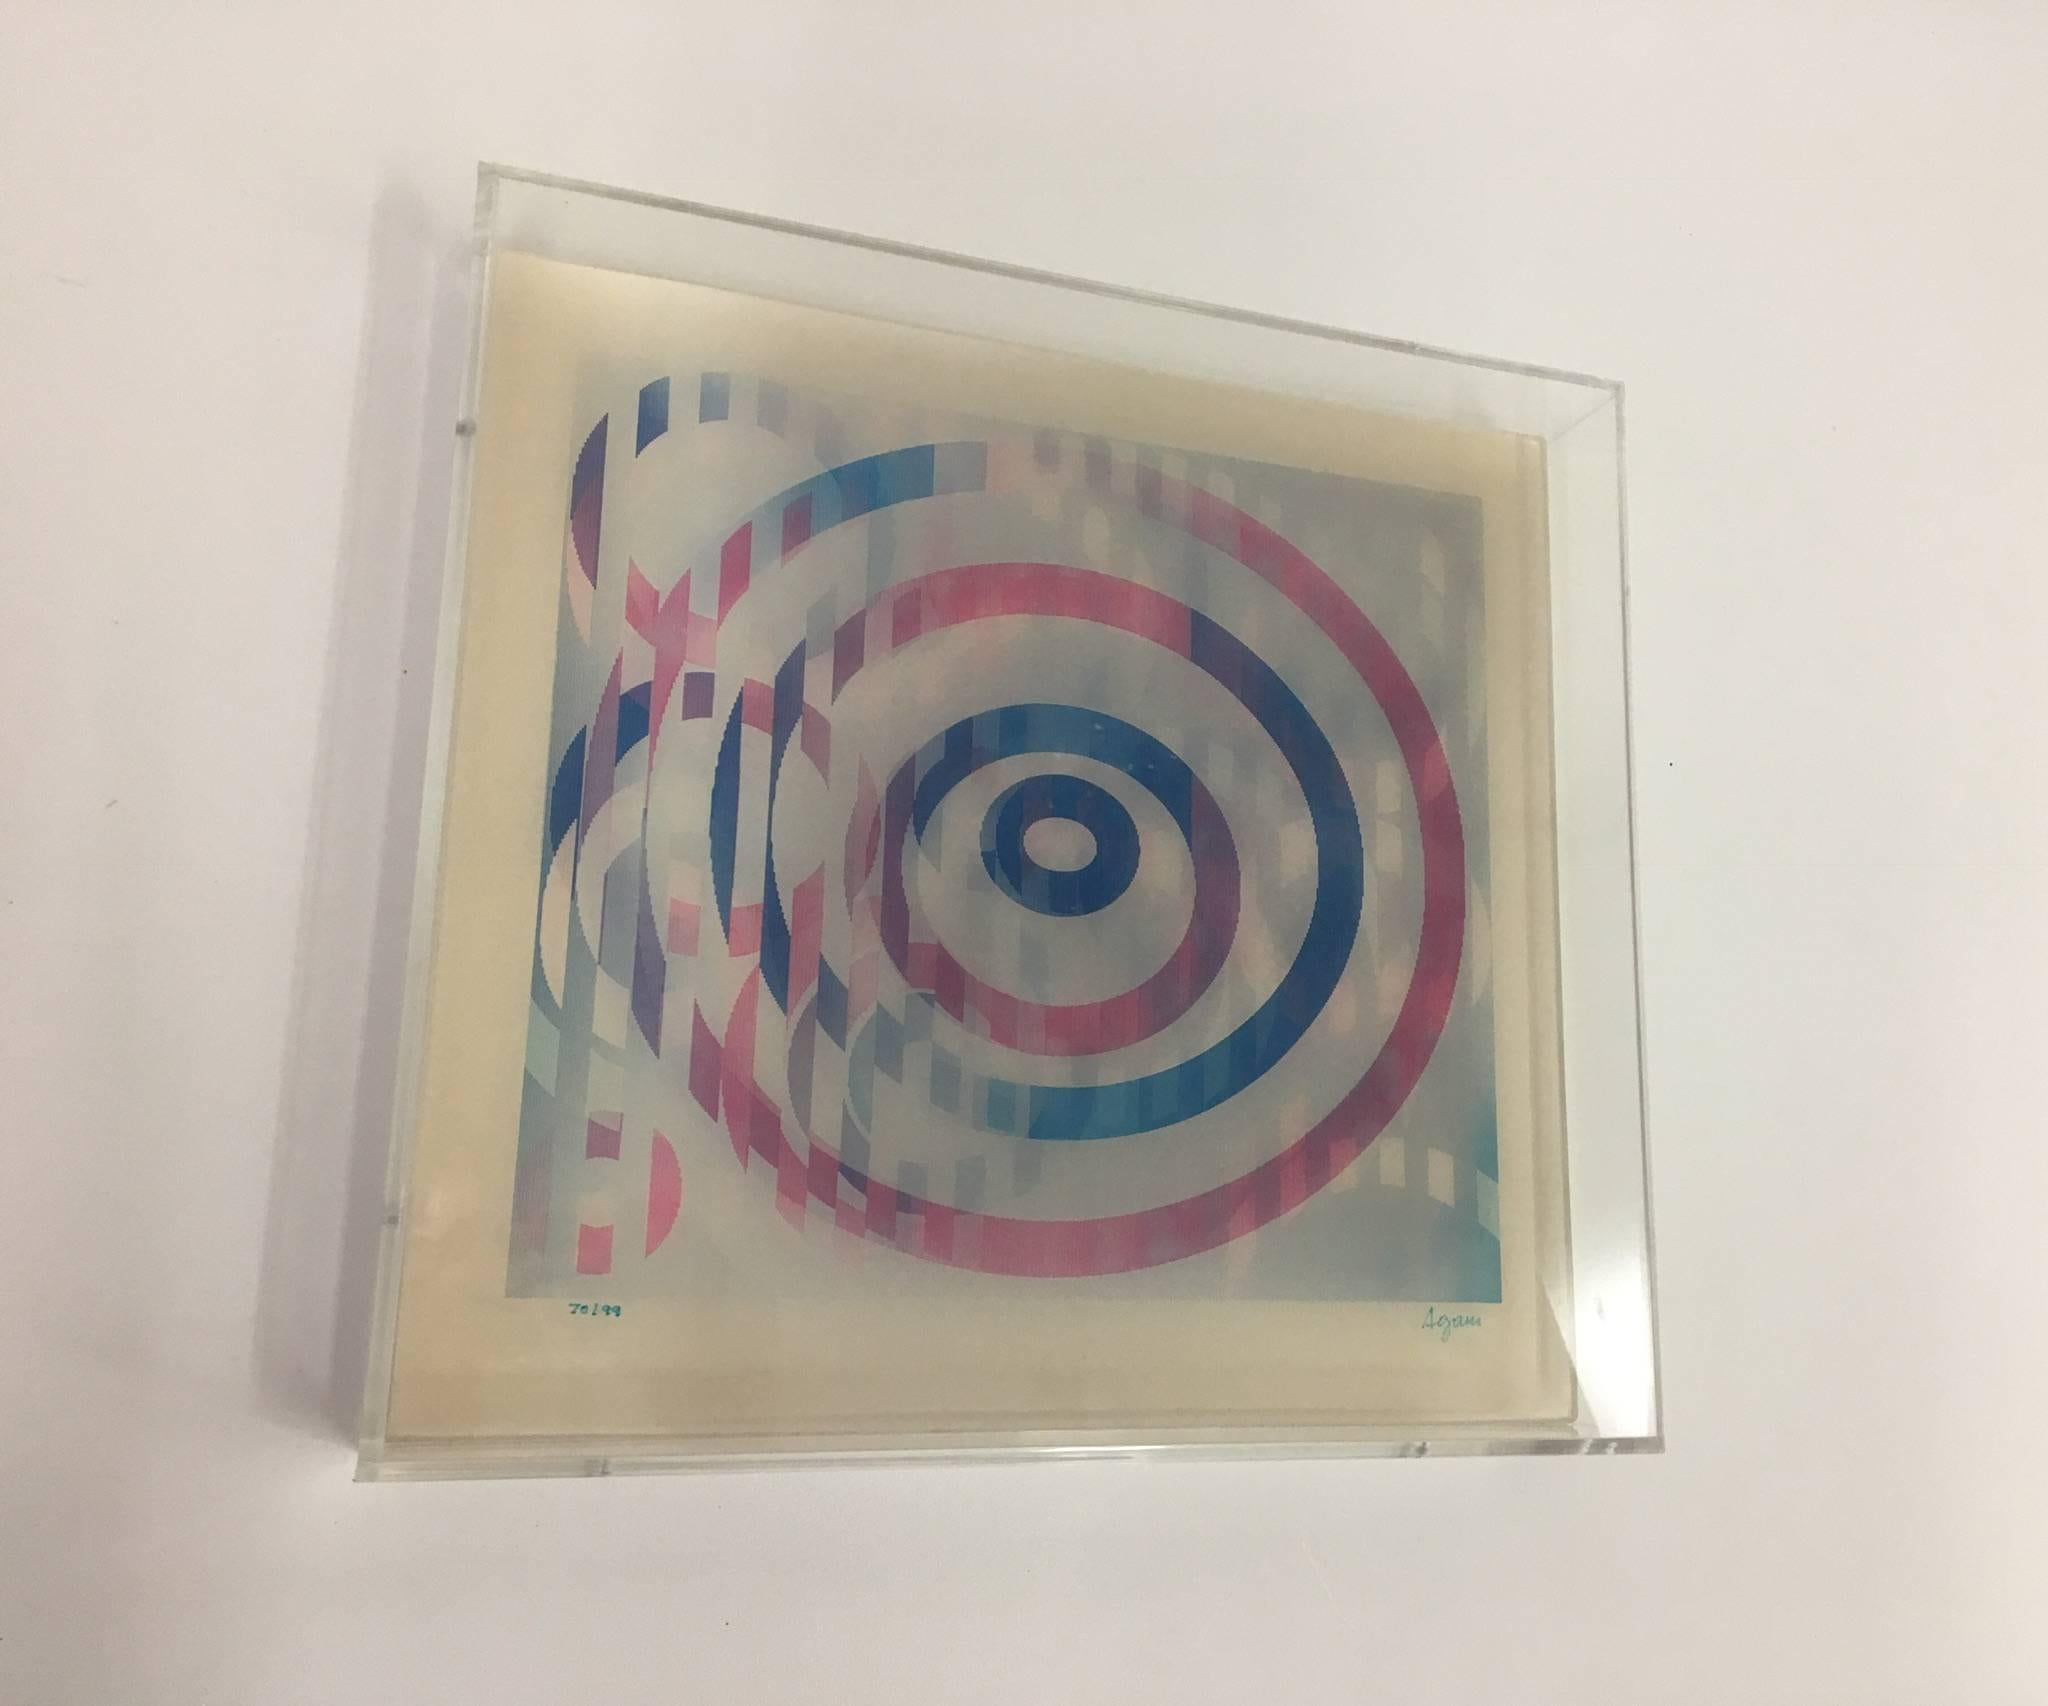 A signed Agam and numbered 70/99 lenticular lightoghraph from the three-piece celebration series from 1990. The image changes depending from where you look at it. Newly framed in a clear acrylic frame. 